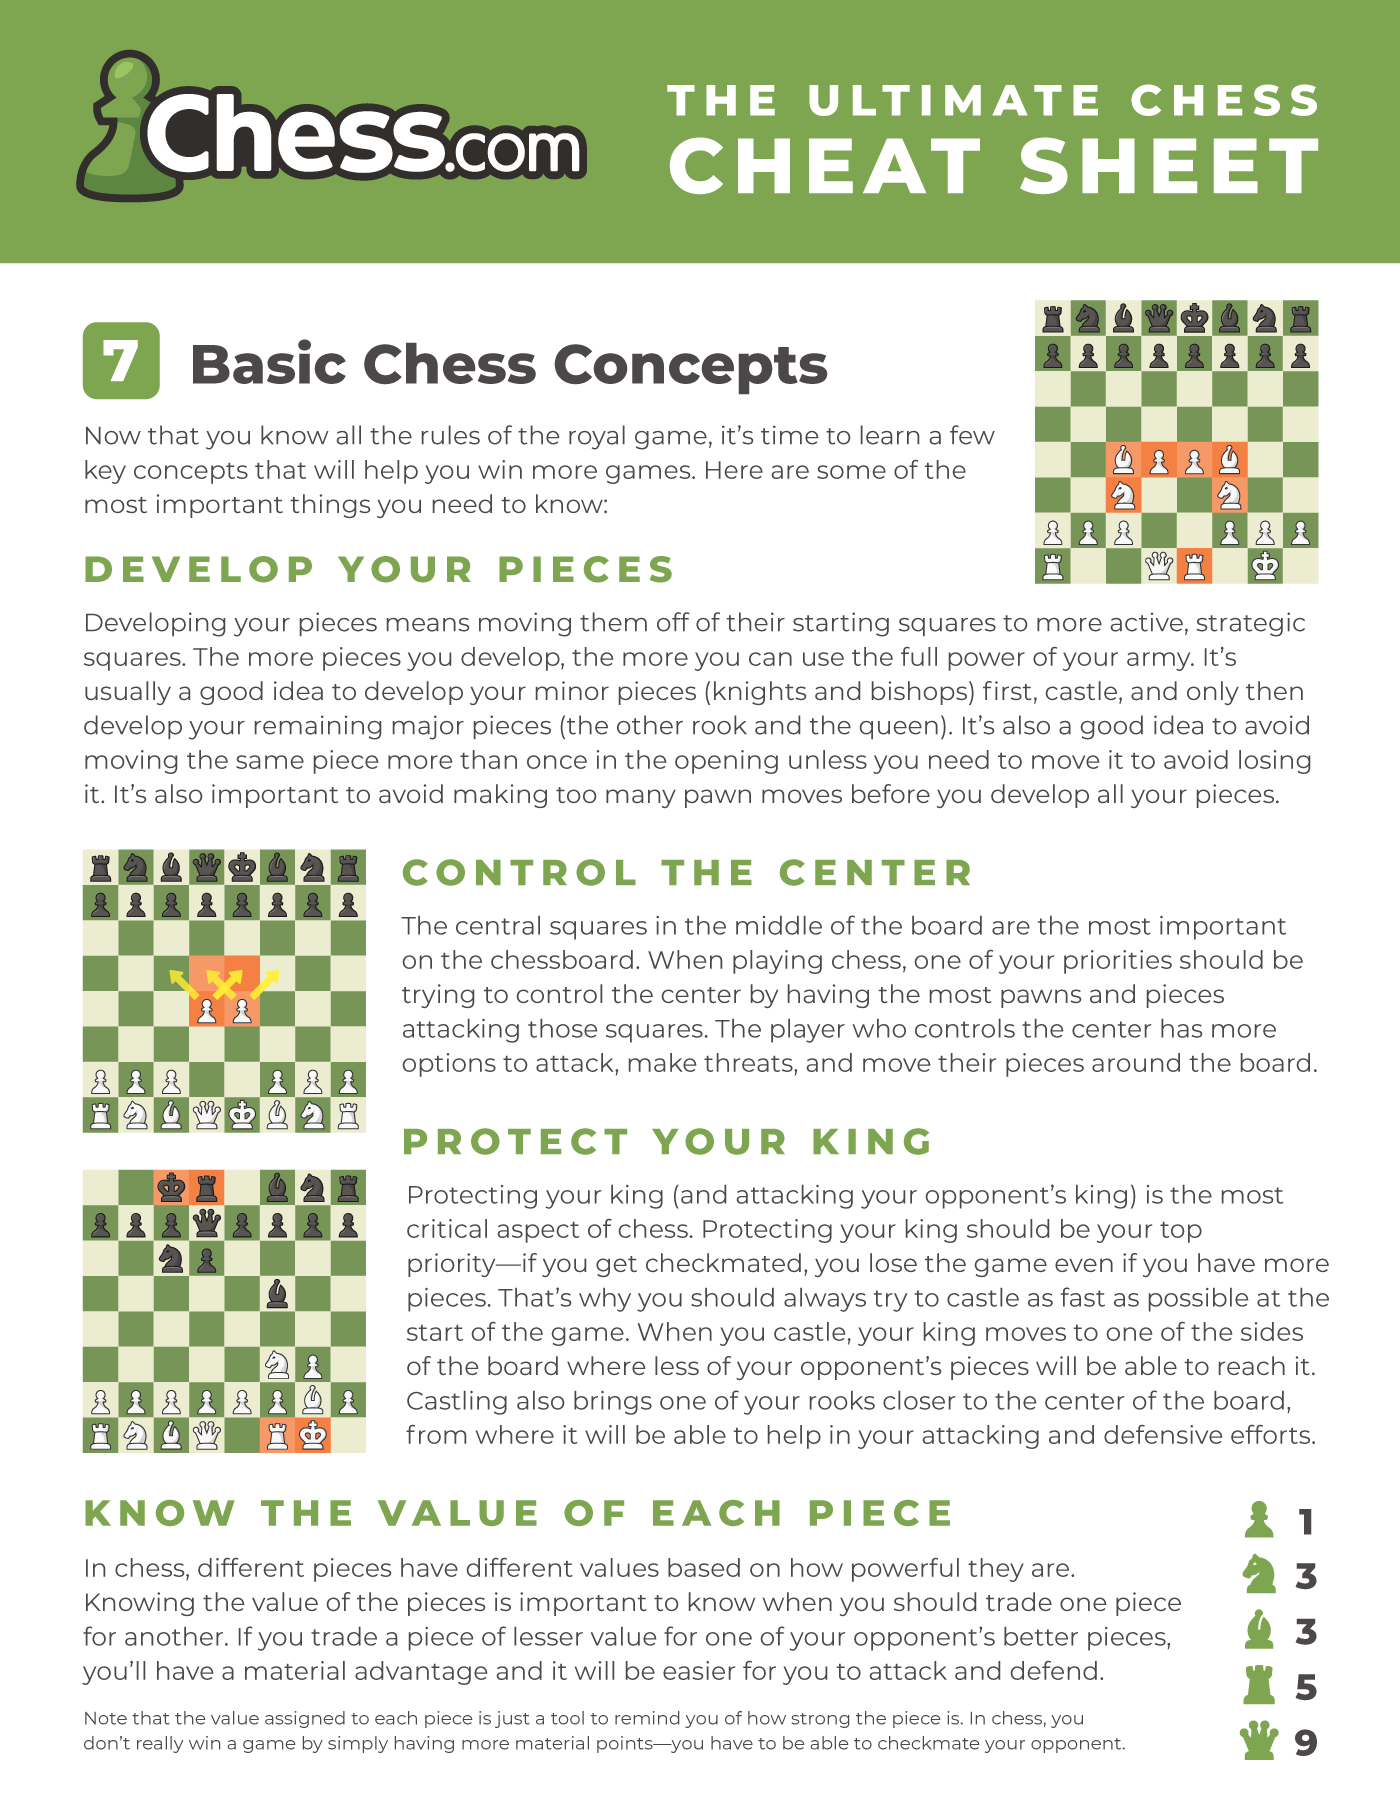 Chess Rules